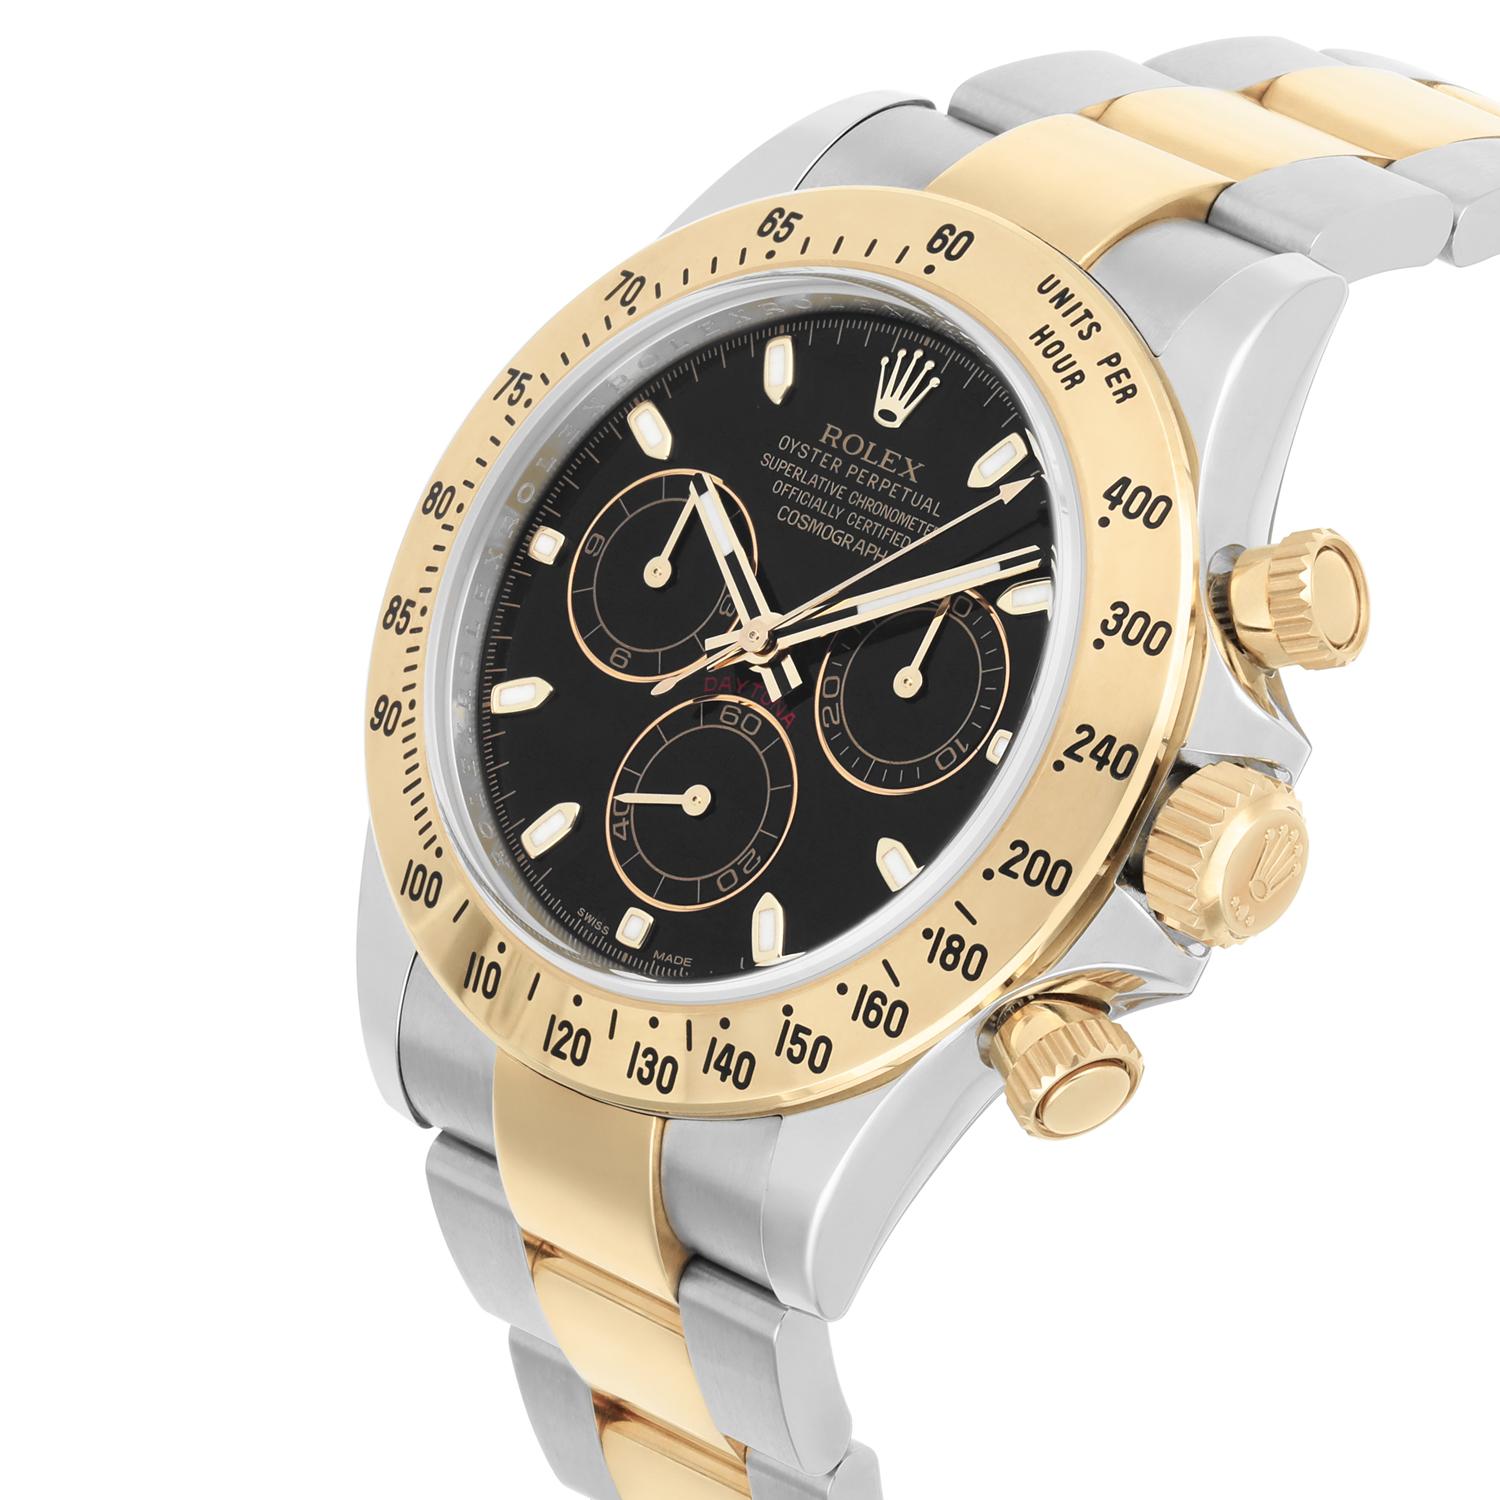 Modern Rolex Daytona Stainless Steel Yellow Gold Black Dial Mens Watch 116523 For Sale